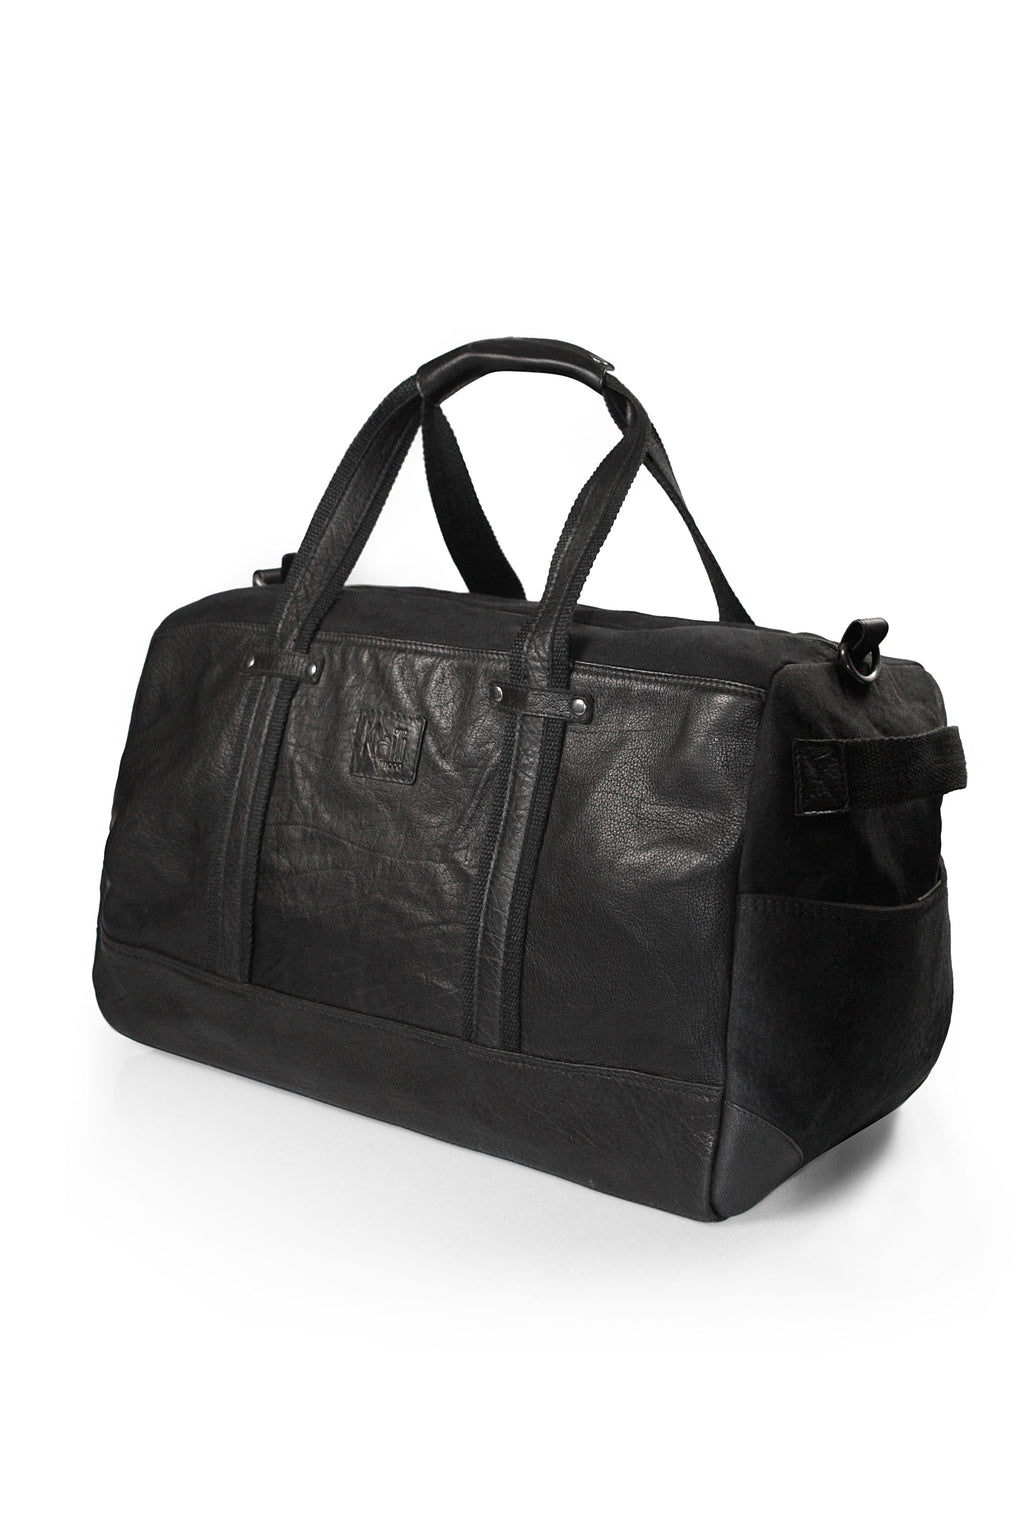 The Ultimate Travel Companion: Stylish Canvas & Leather Duffle Bag